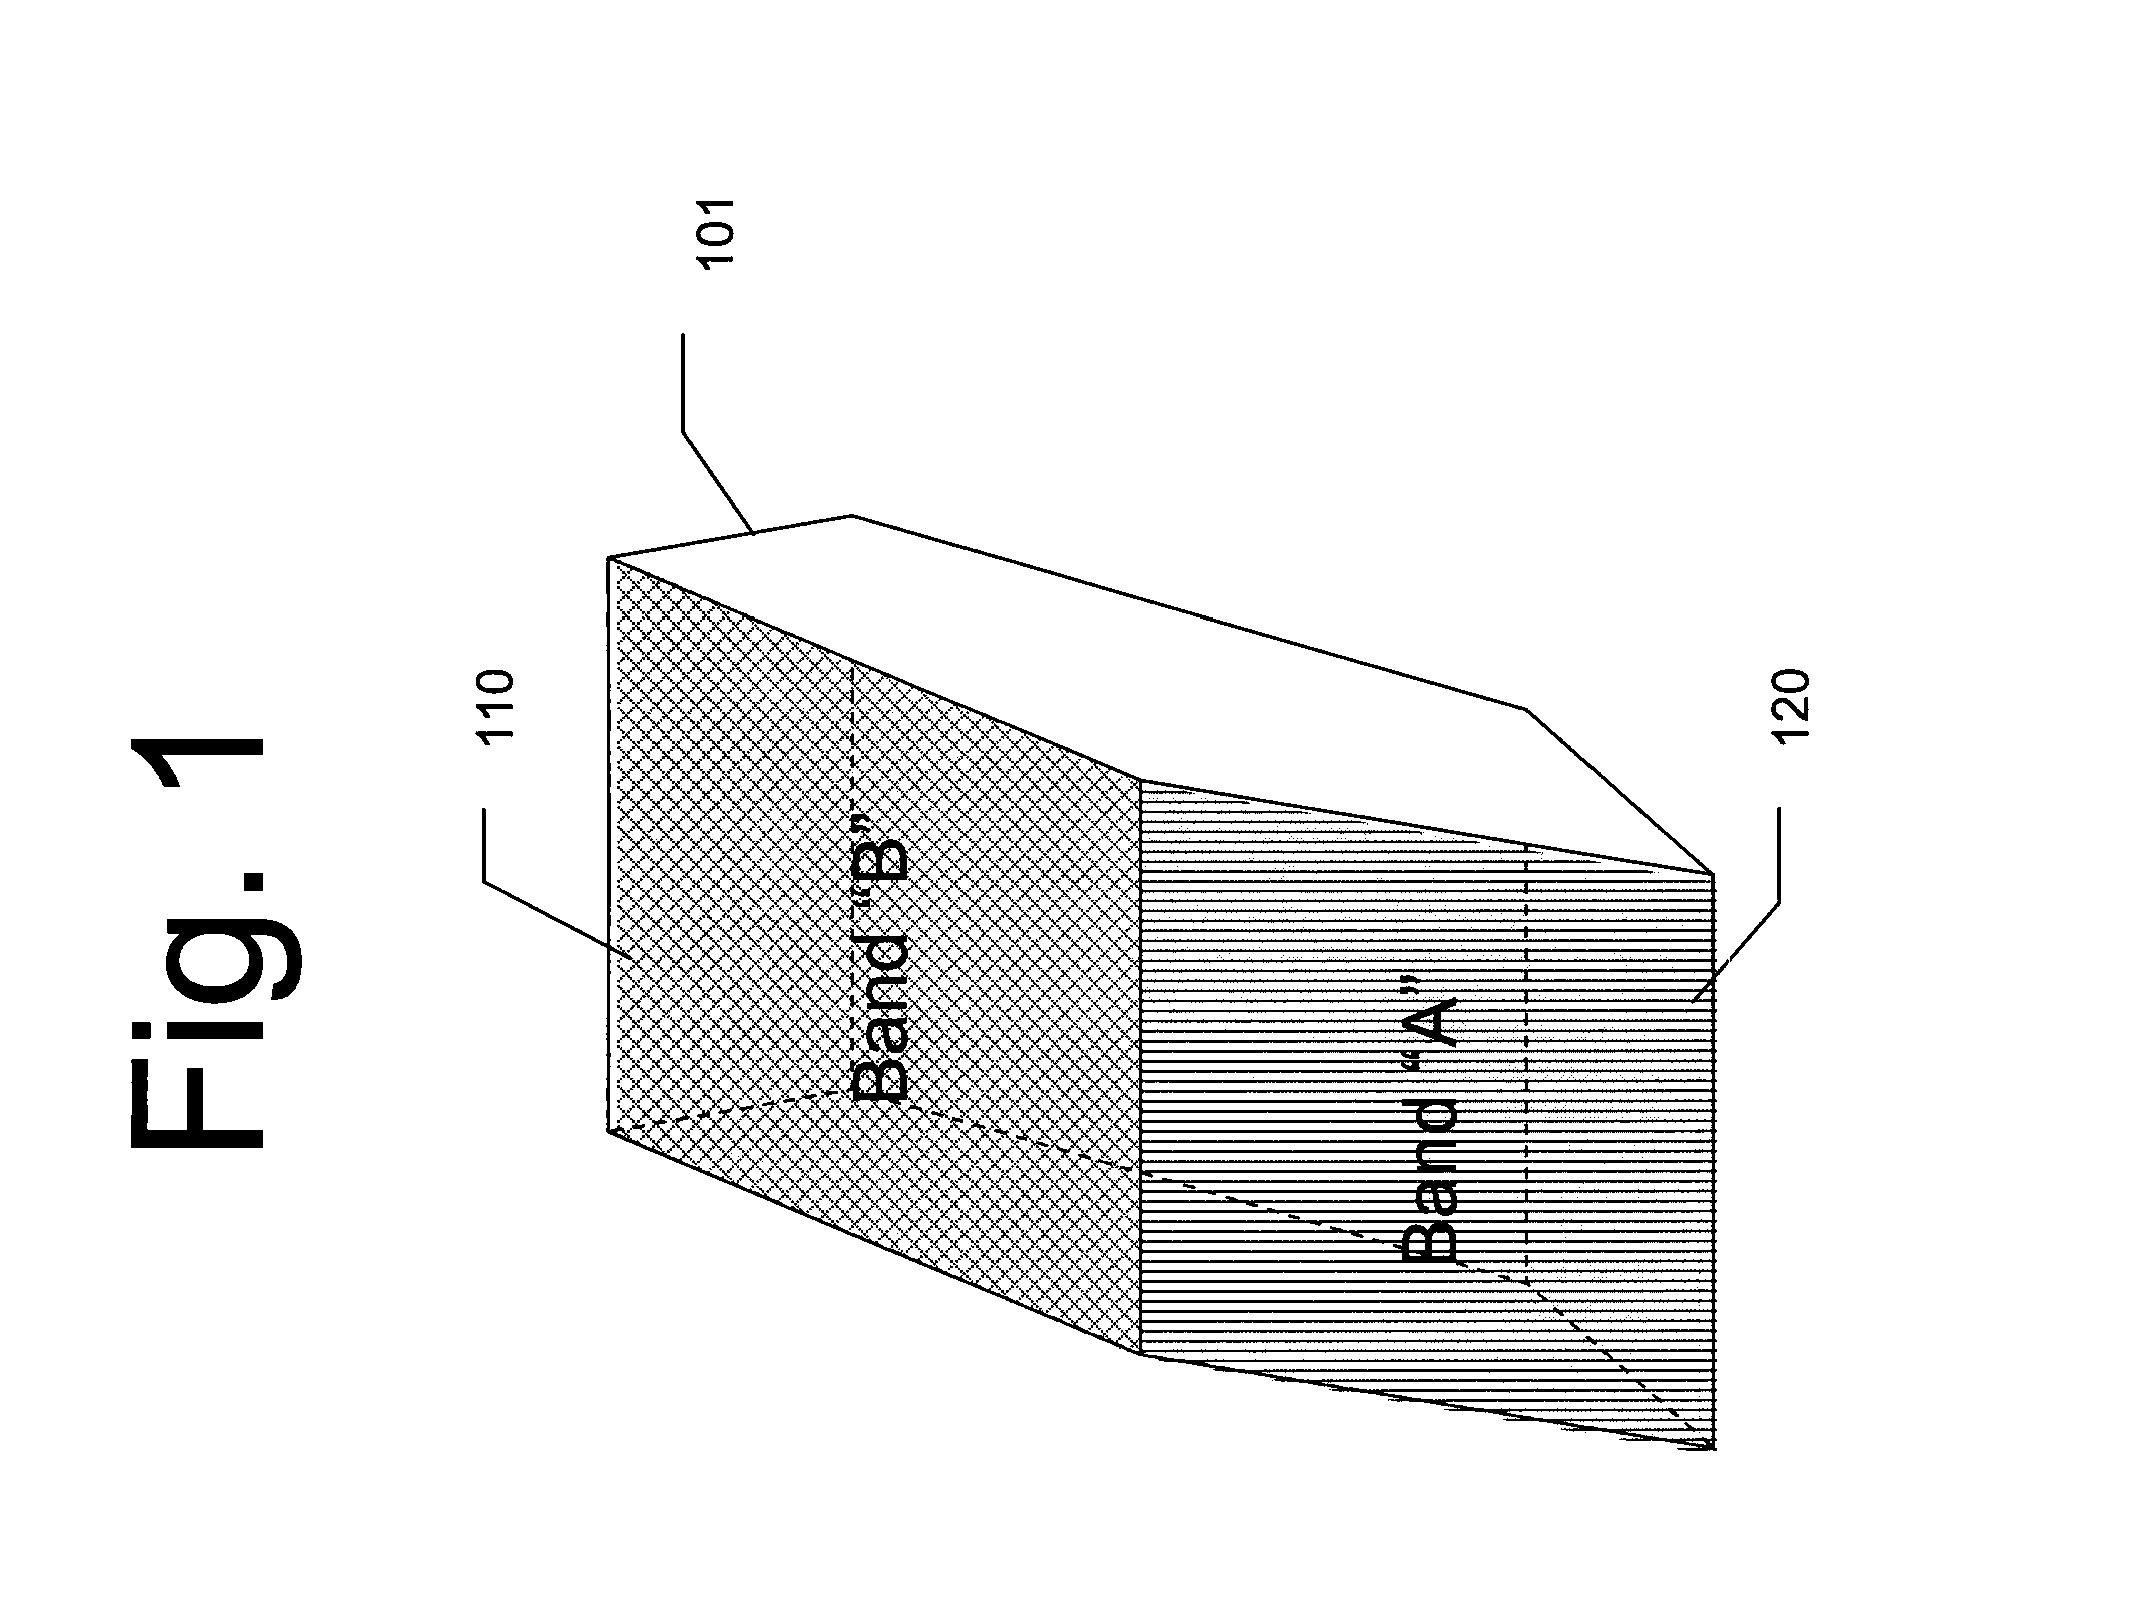 System and Method For Analysis of Image Data